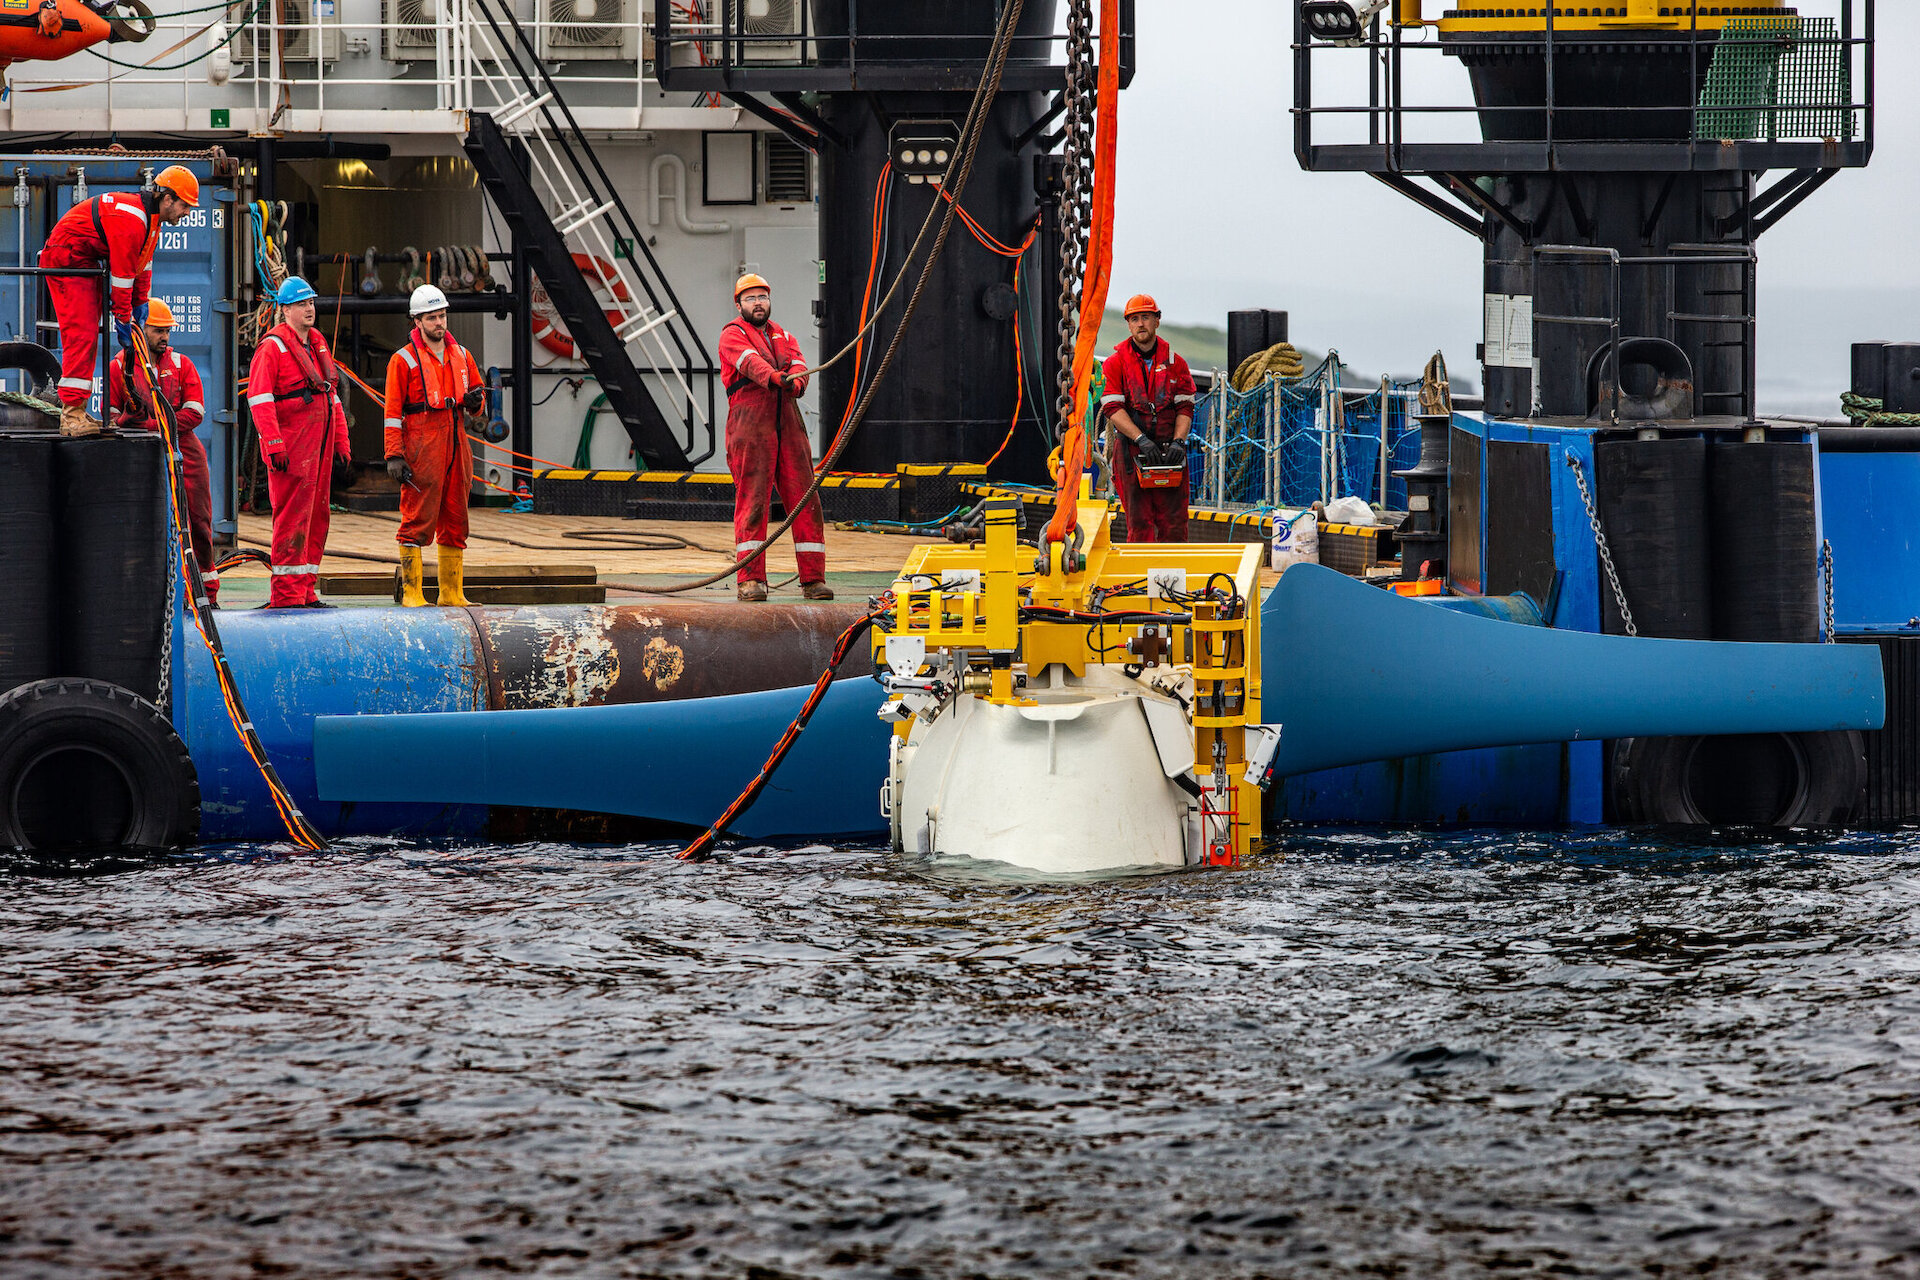 One of the tidal turbines being deployed at Nova Innovation's array in the Bluemull Sound between Yell and Unst.